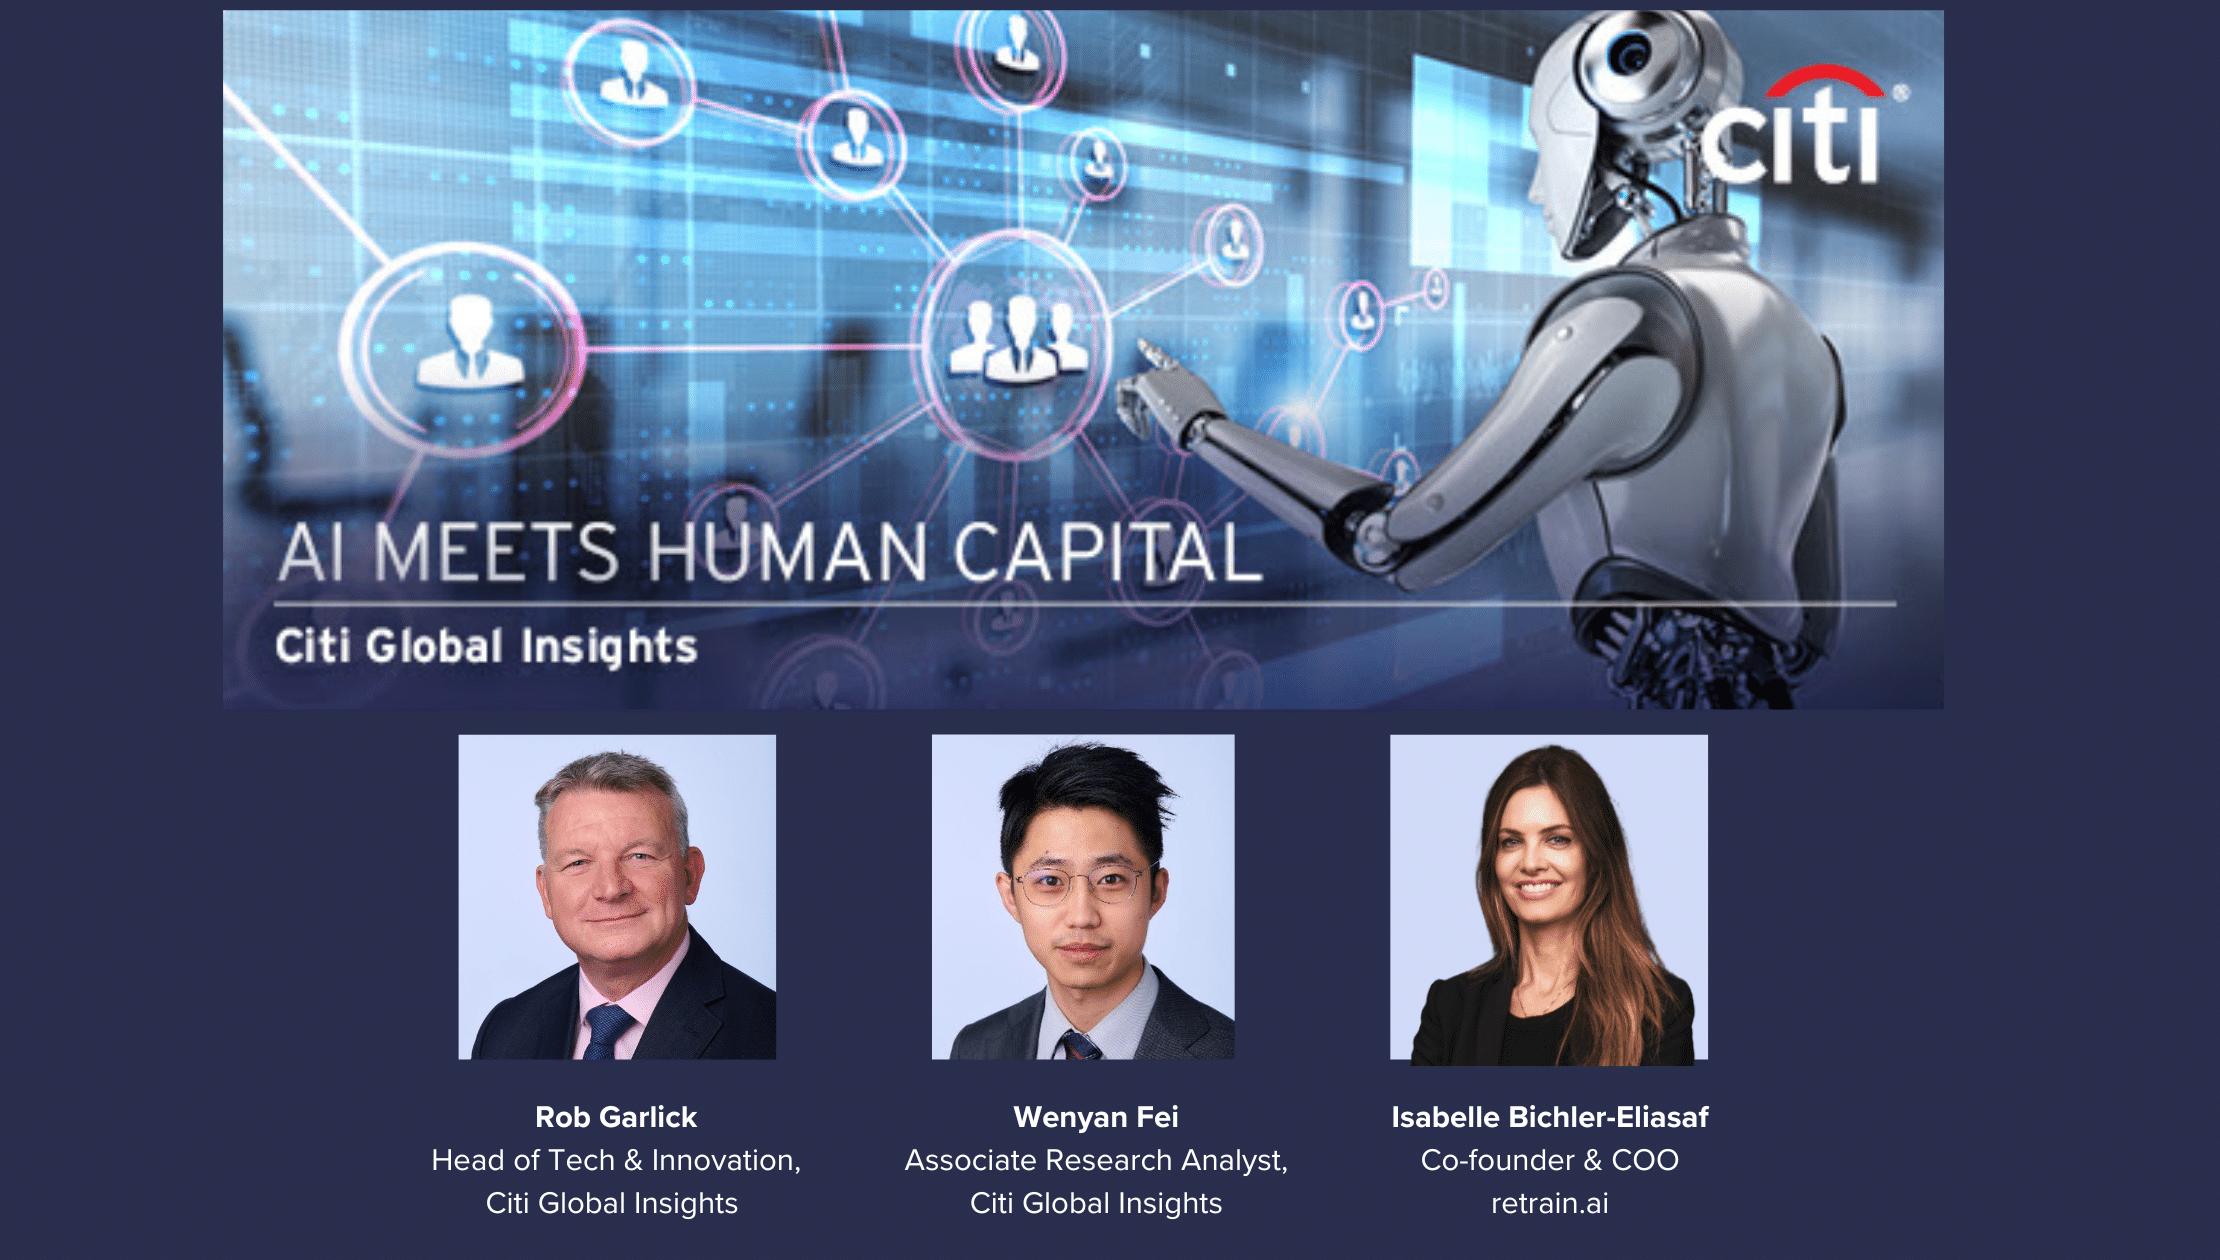 Webinar: retrain.ai and Citi Global Insights discuss how AI empowers HRs (Part 2 of 2)